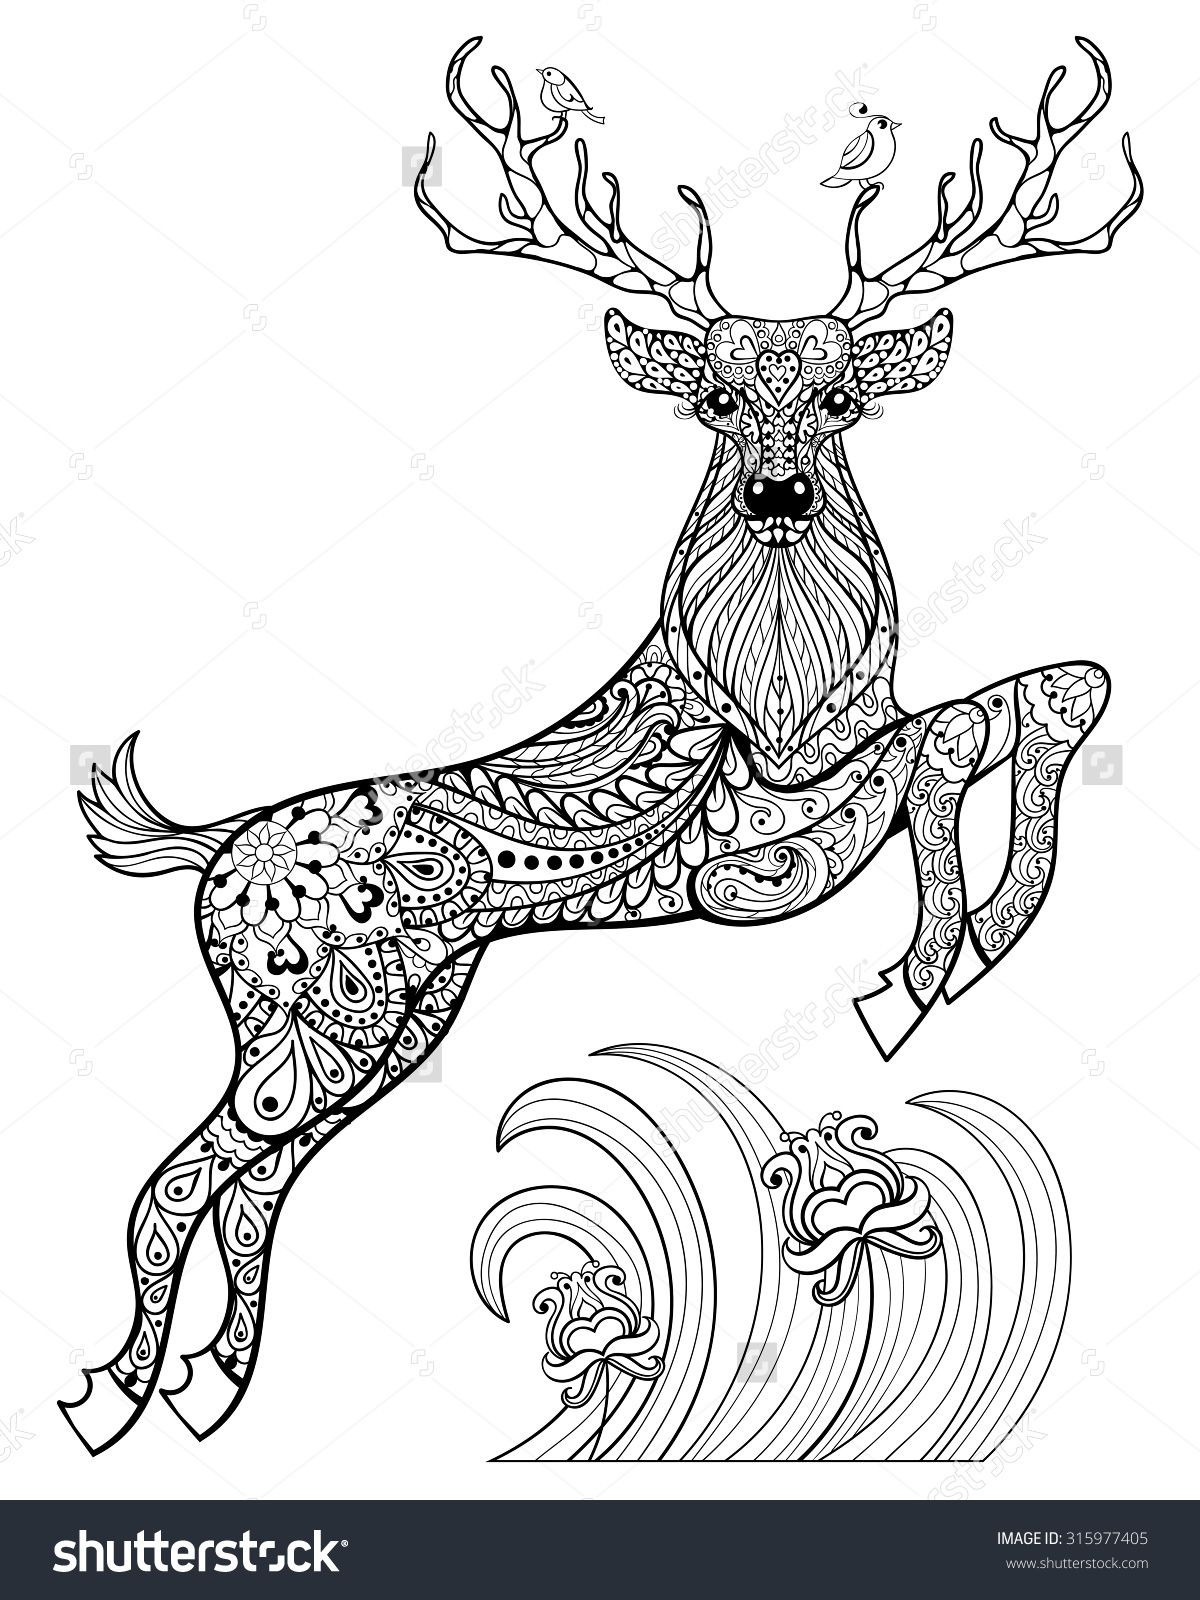 Deer Coloring Pages For Adults
 Deer Coloring Pages for Adults